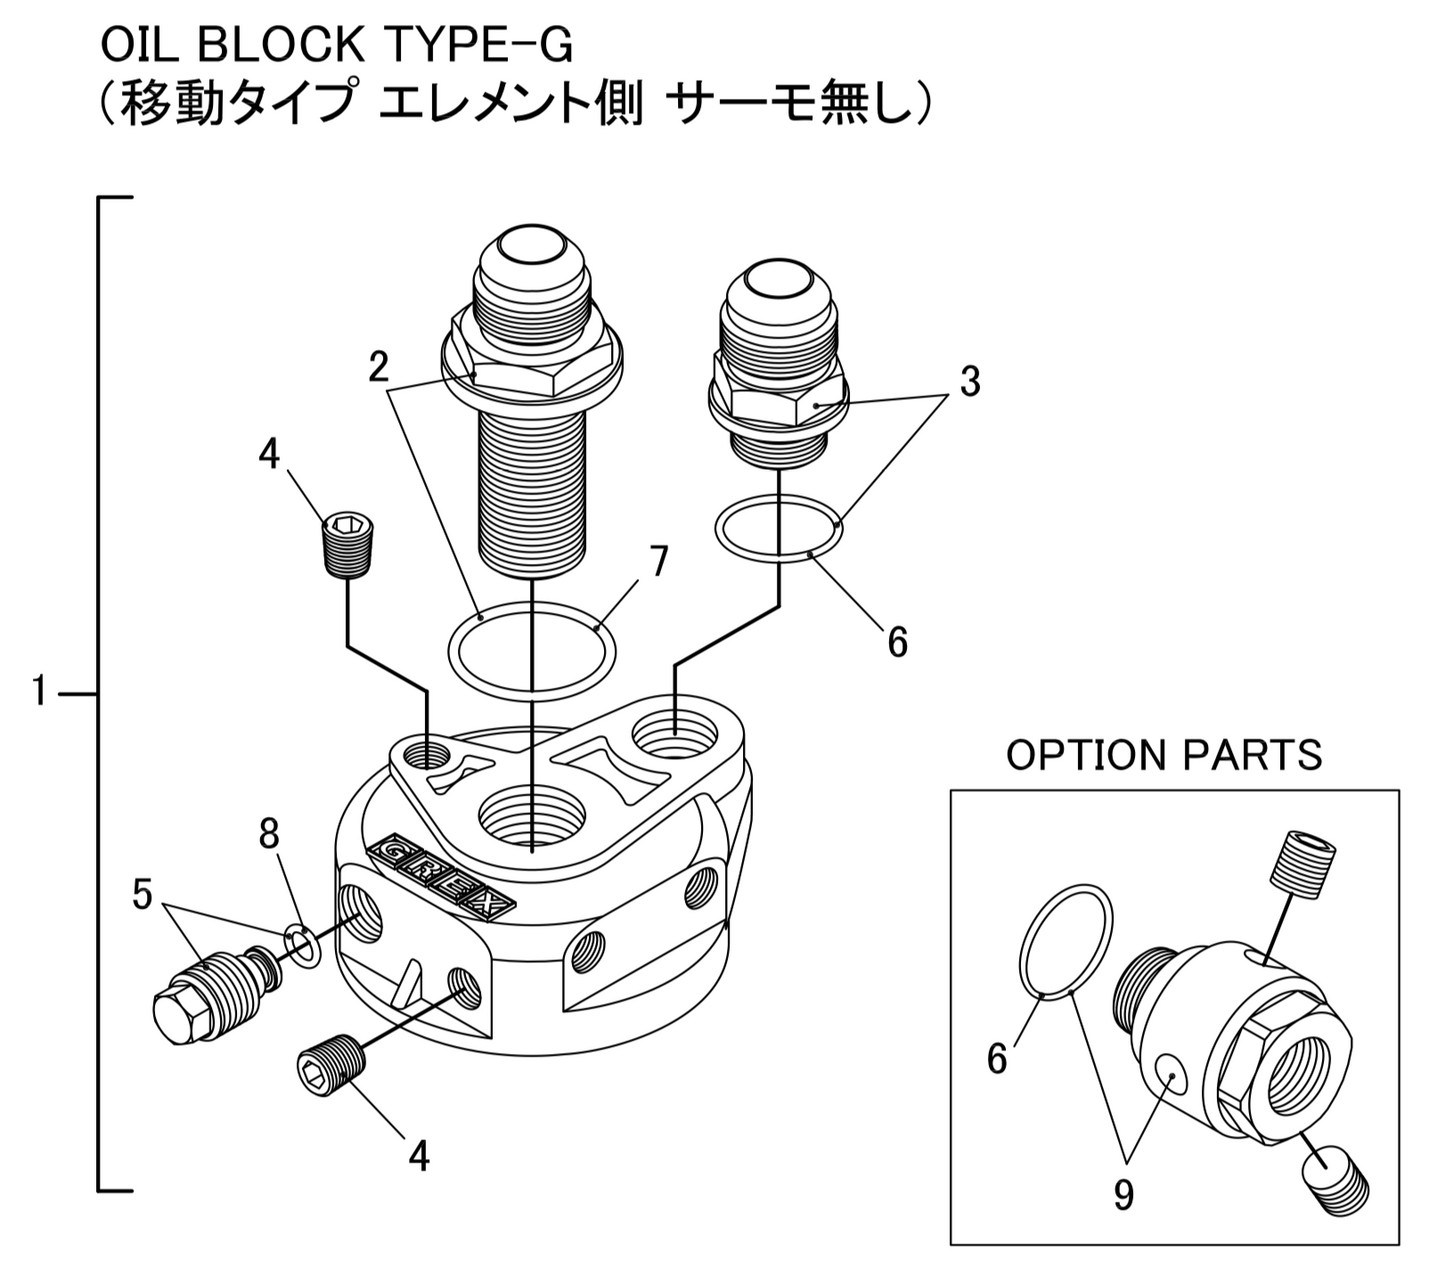 GReddy TRUST Japan OIL BLOCK TYPE-G (MU MOVEMENT TYPE ELEMENT SIDE THERMO) FOR 12401120